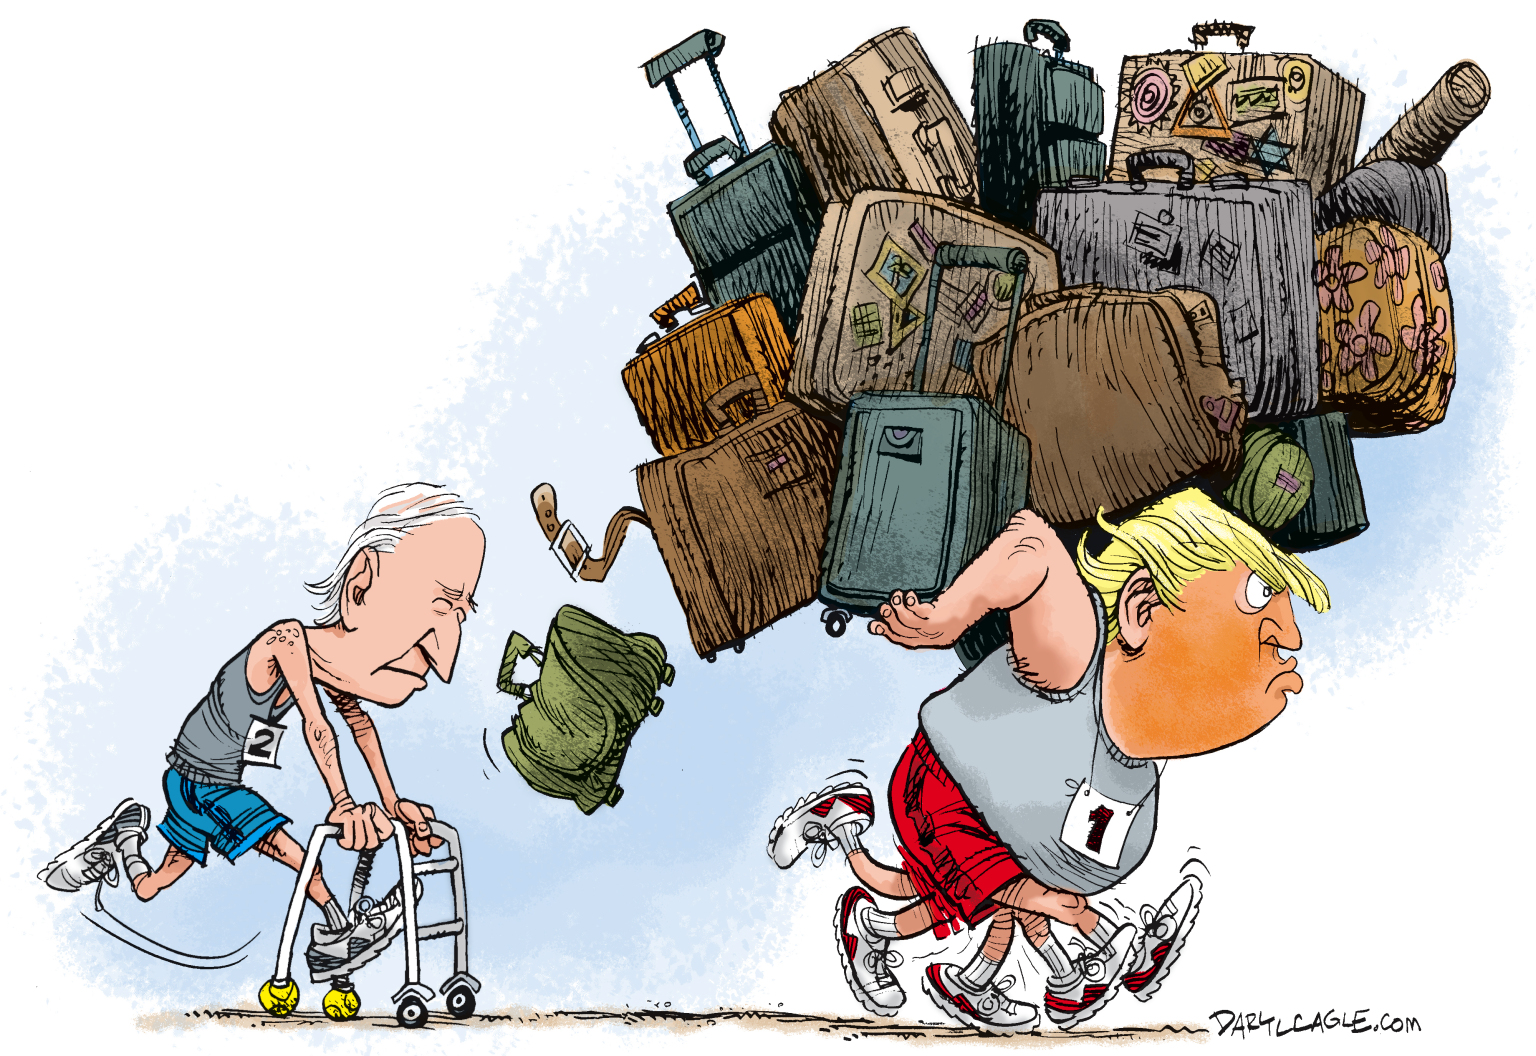 Presidential Race - By Daryl Cagle